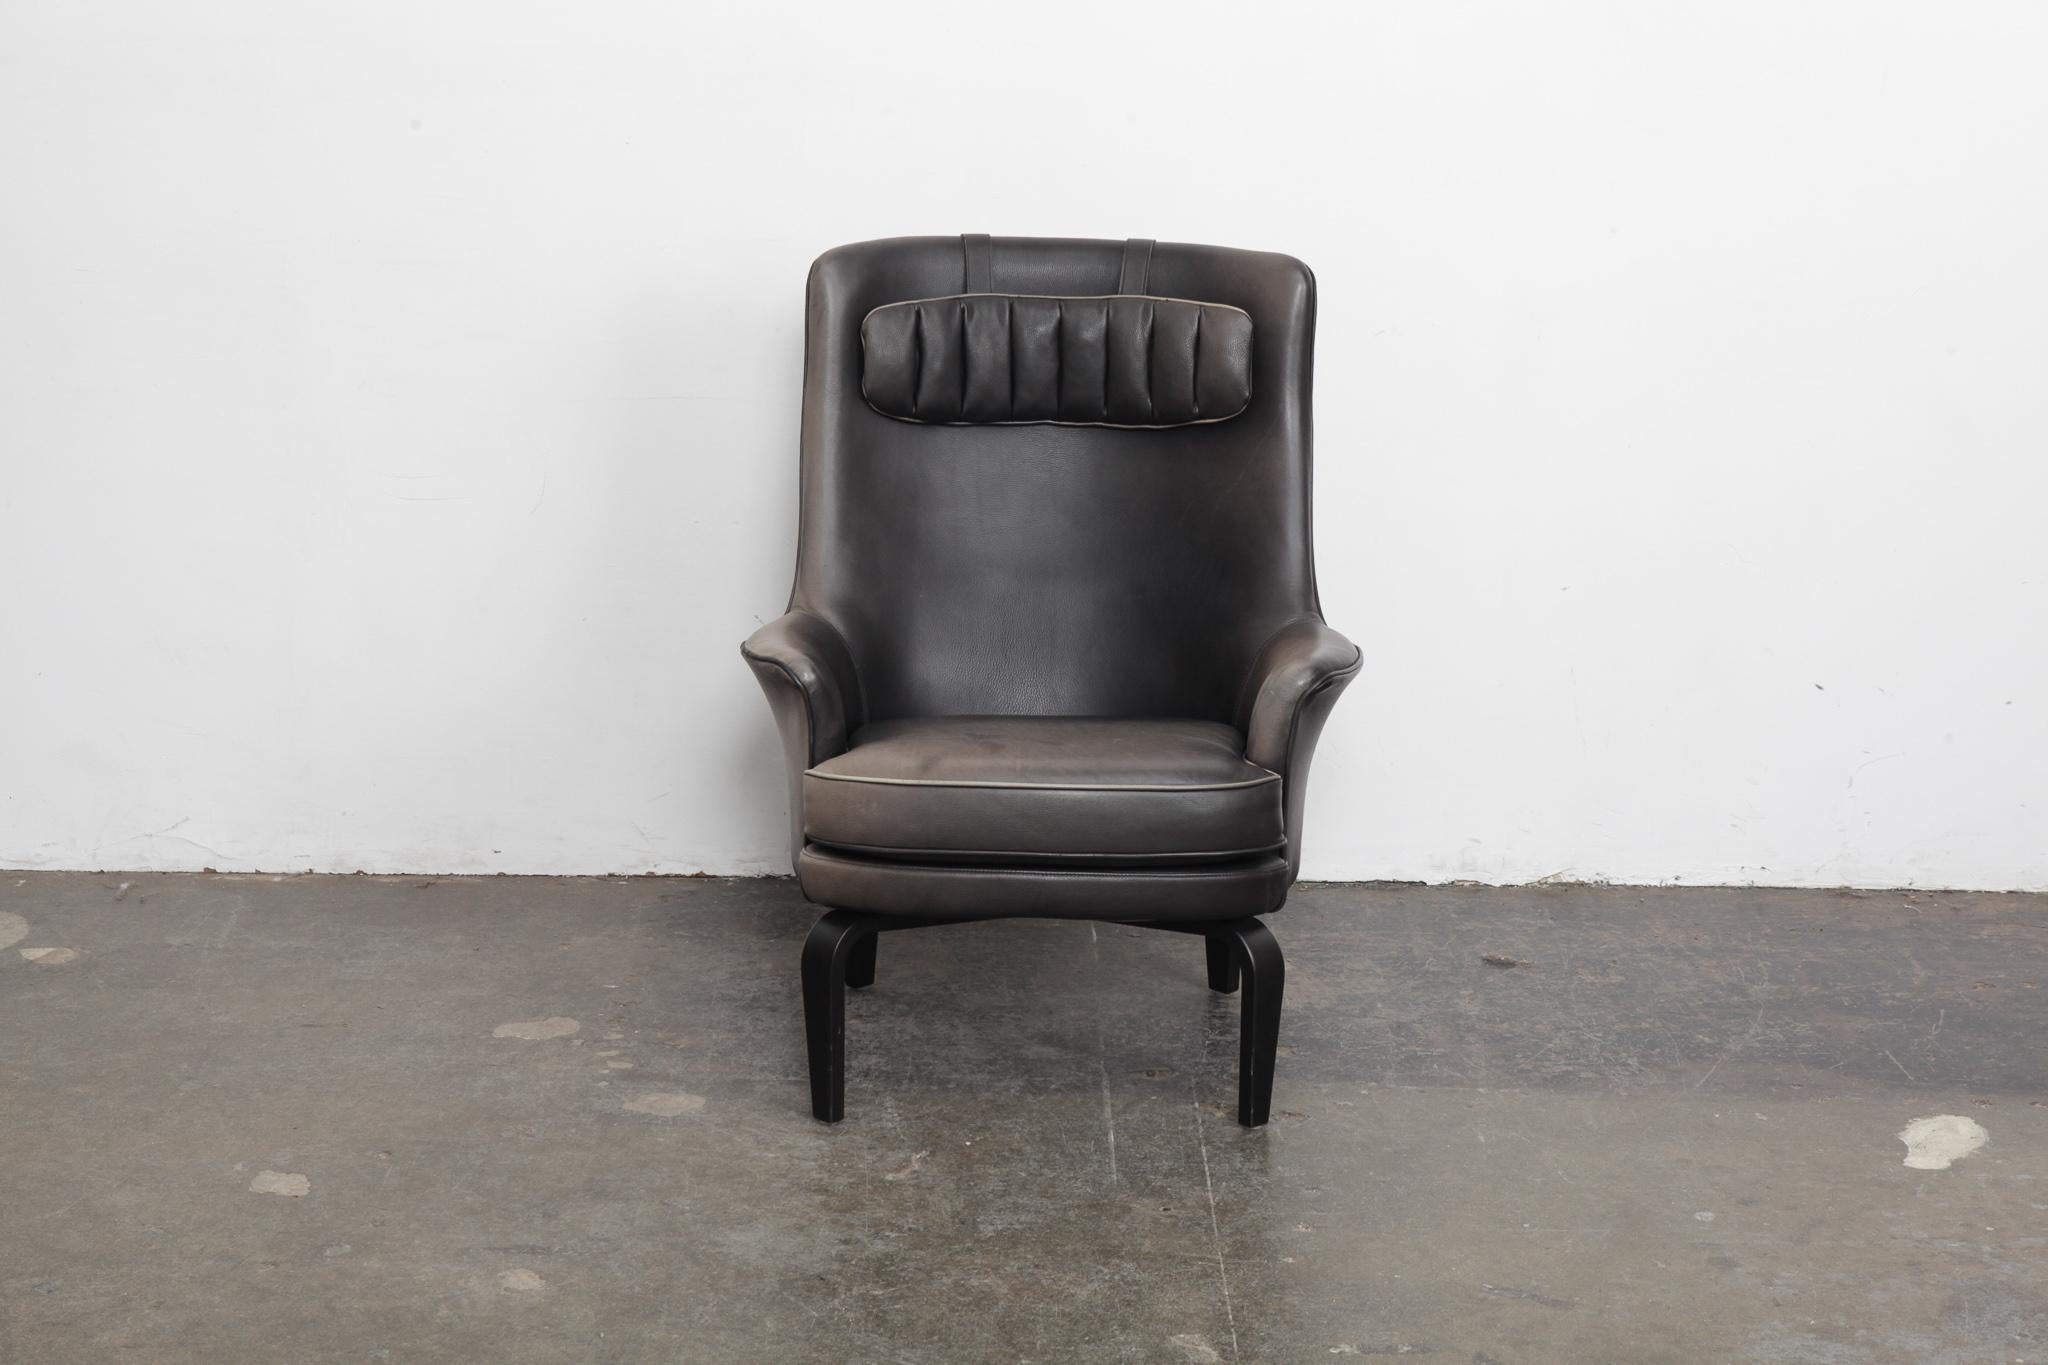 Swedish lounge chair in original black leather that has faded to a dark grey in many areas, designed by Arne Norell for Norell AB, model 'Pilot'. Ebonized beech bent wood legs and original headrest as well.